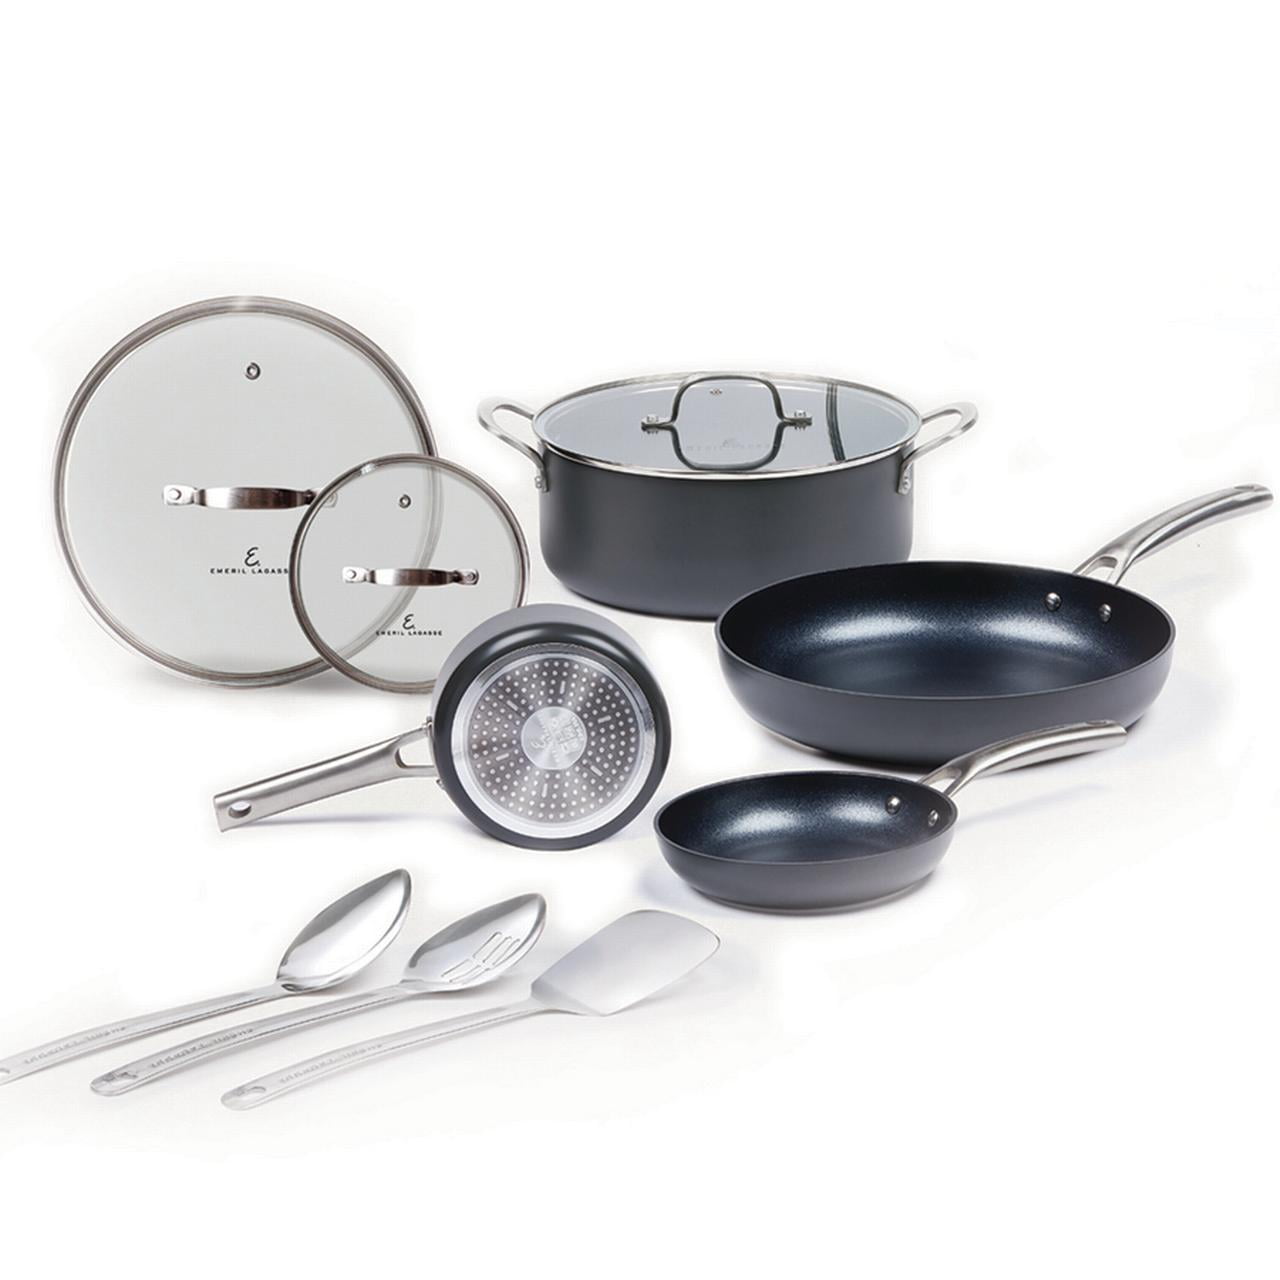 Details about   Nonstick Cookware Set 12 Piece Kitchen Ceramic Pots and Pans with Lids Cooking 